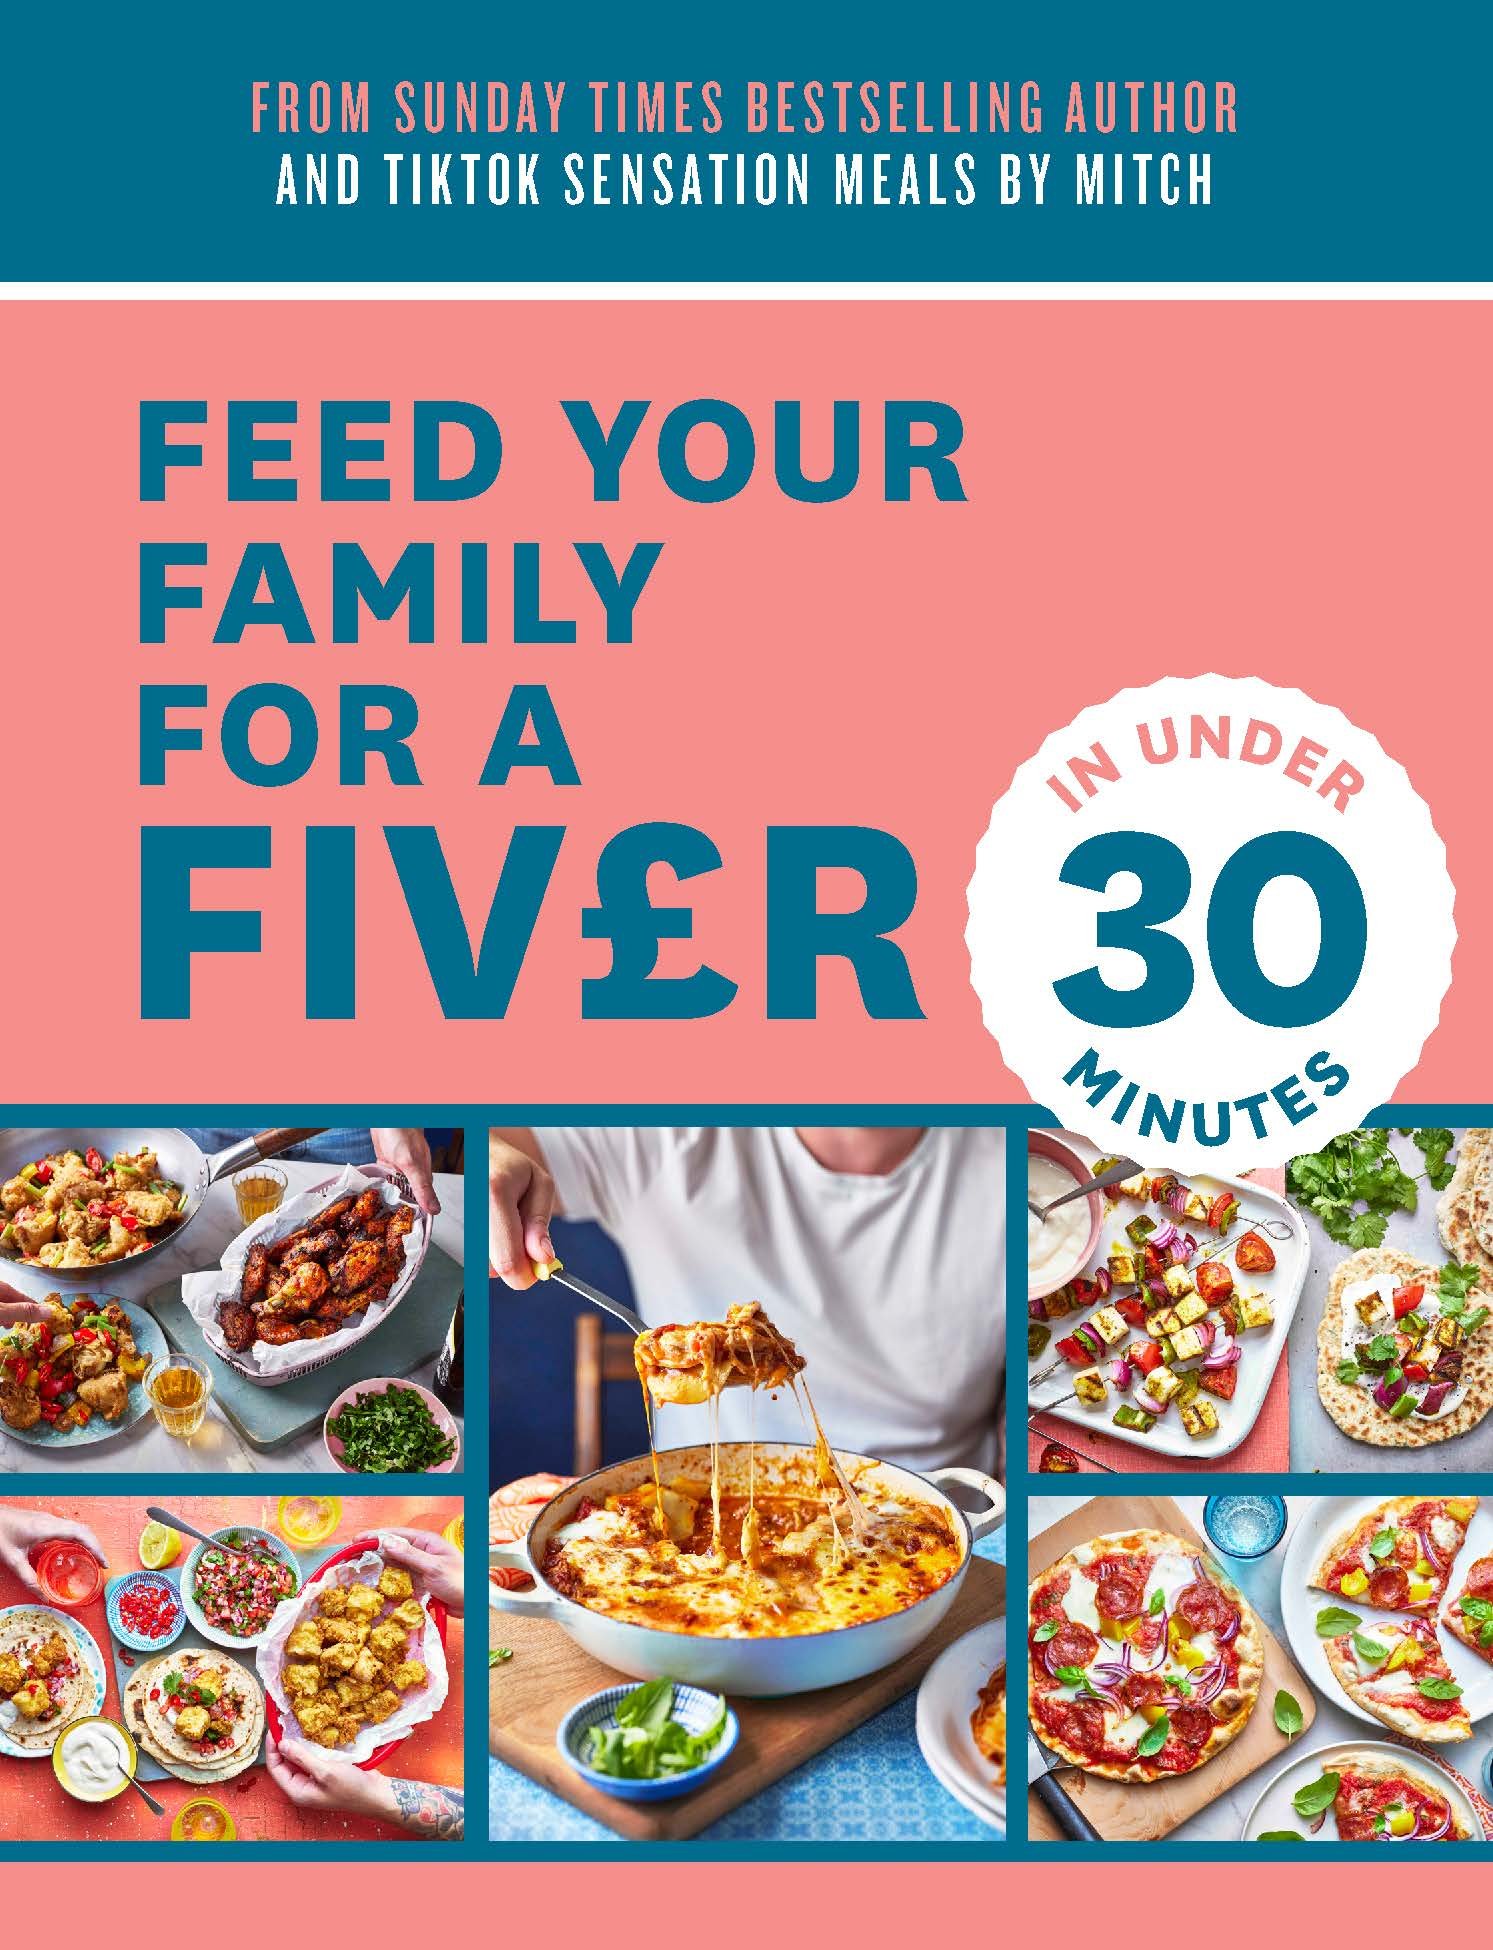 Feed your family for a fiver in under 30 minutes_Full Cover_V2.jpg